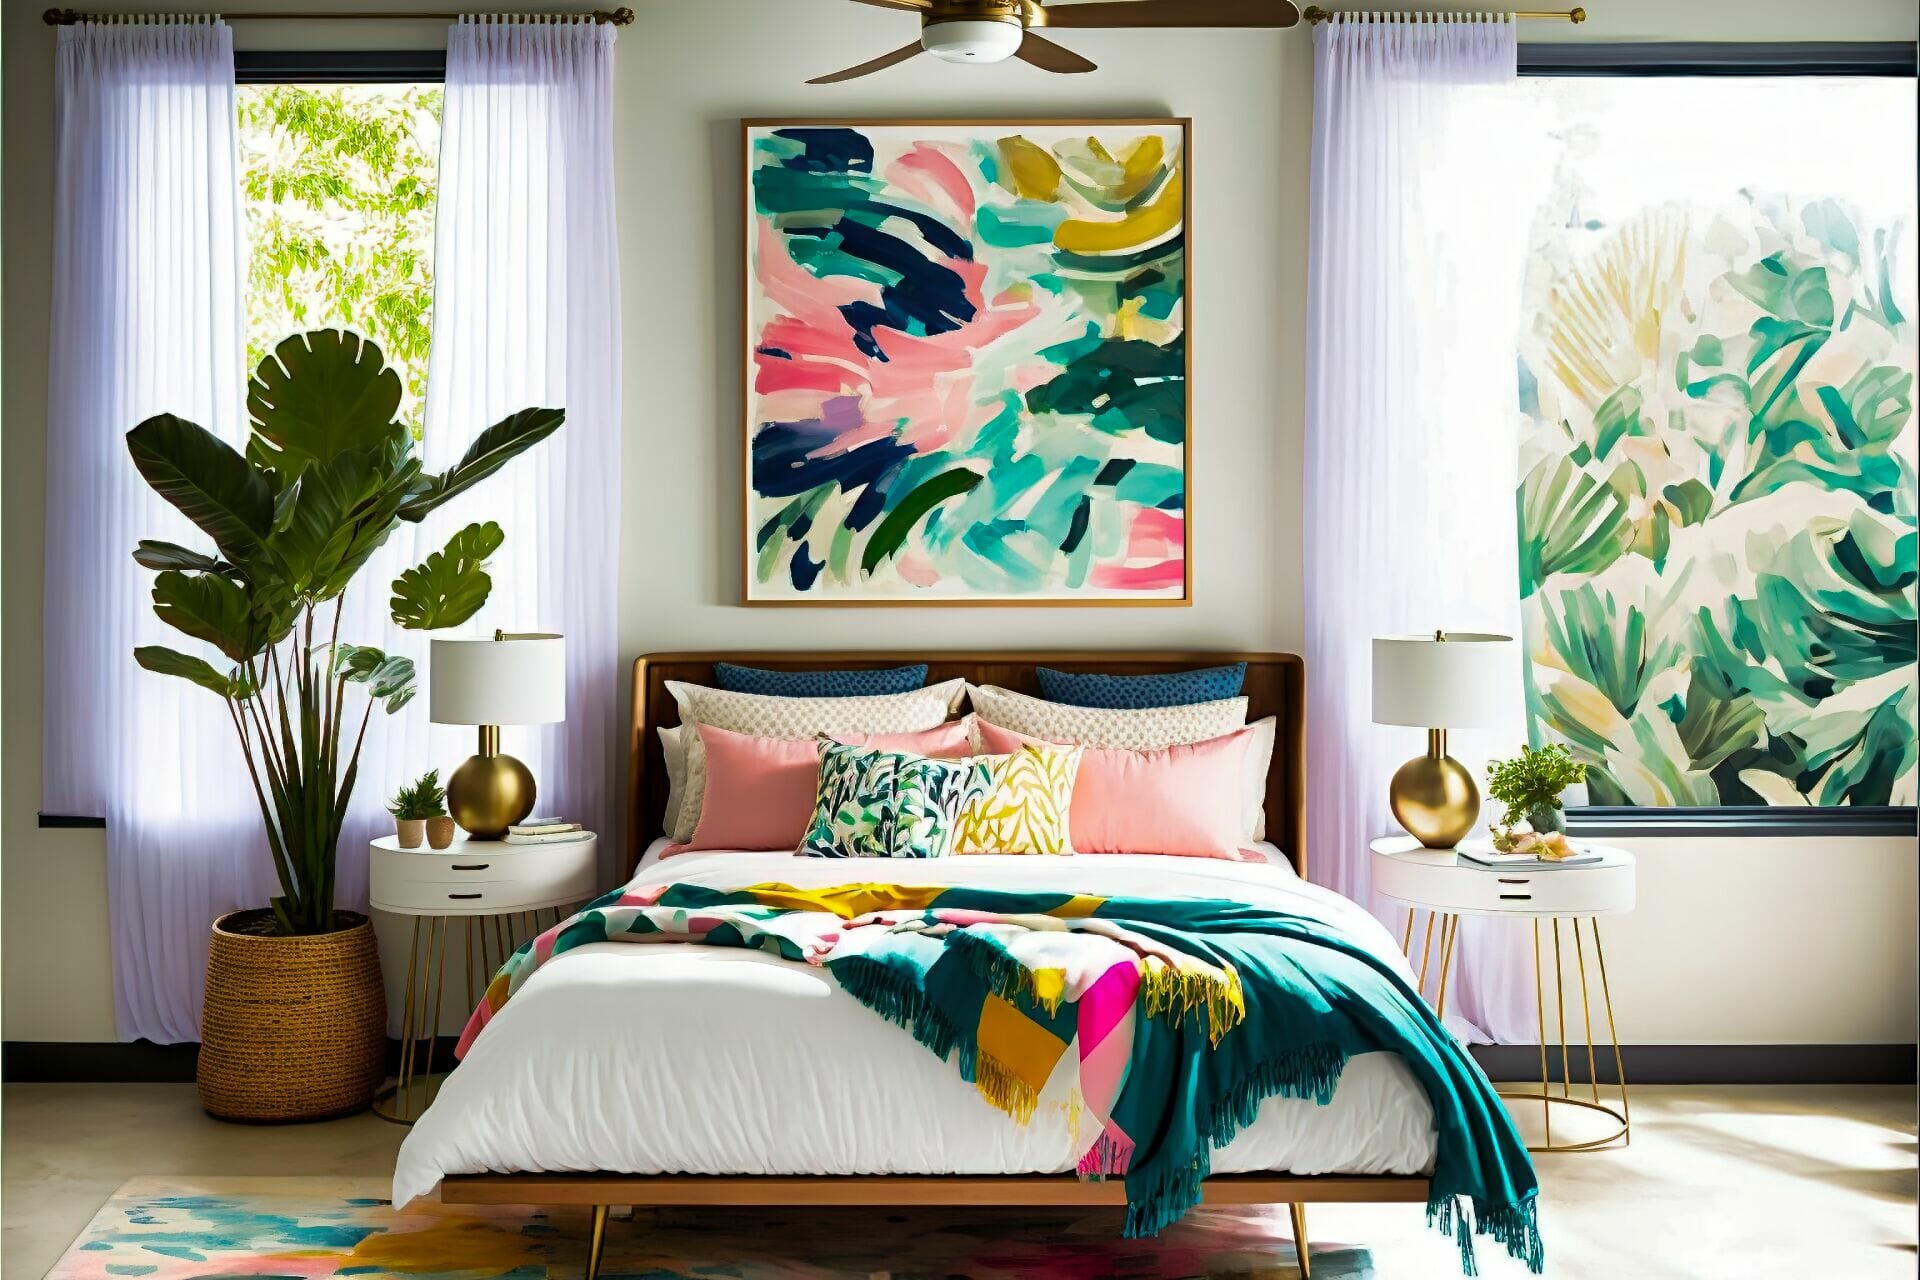 Mid-Century Modern Bedroom – A Bright And Airy Modern Bedroom Featuring A Rattan Bed Frame With A Colorful Tropical Print Bedspread, A Spinning Ceiling Fan, And An Abstract Art Piece Hung Above The Bed.